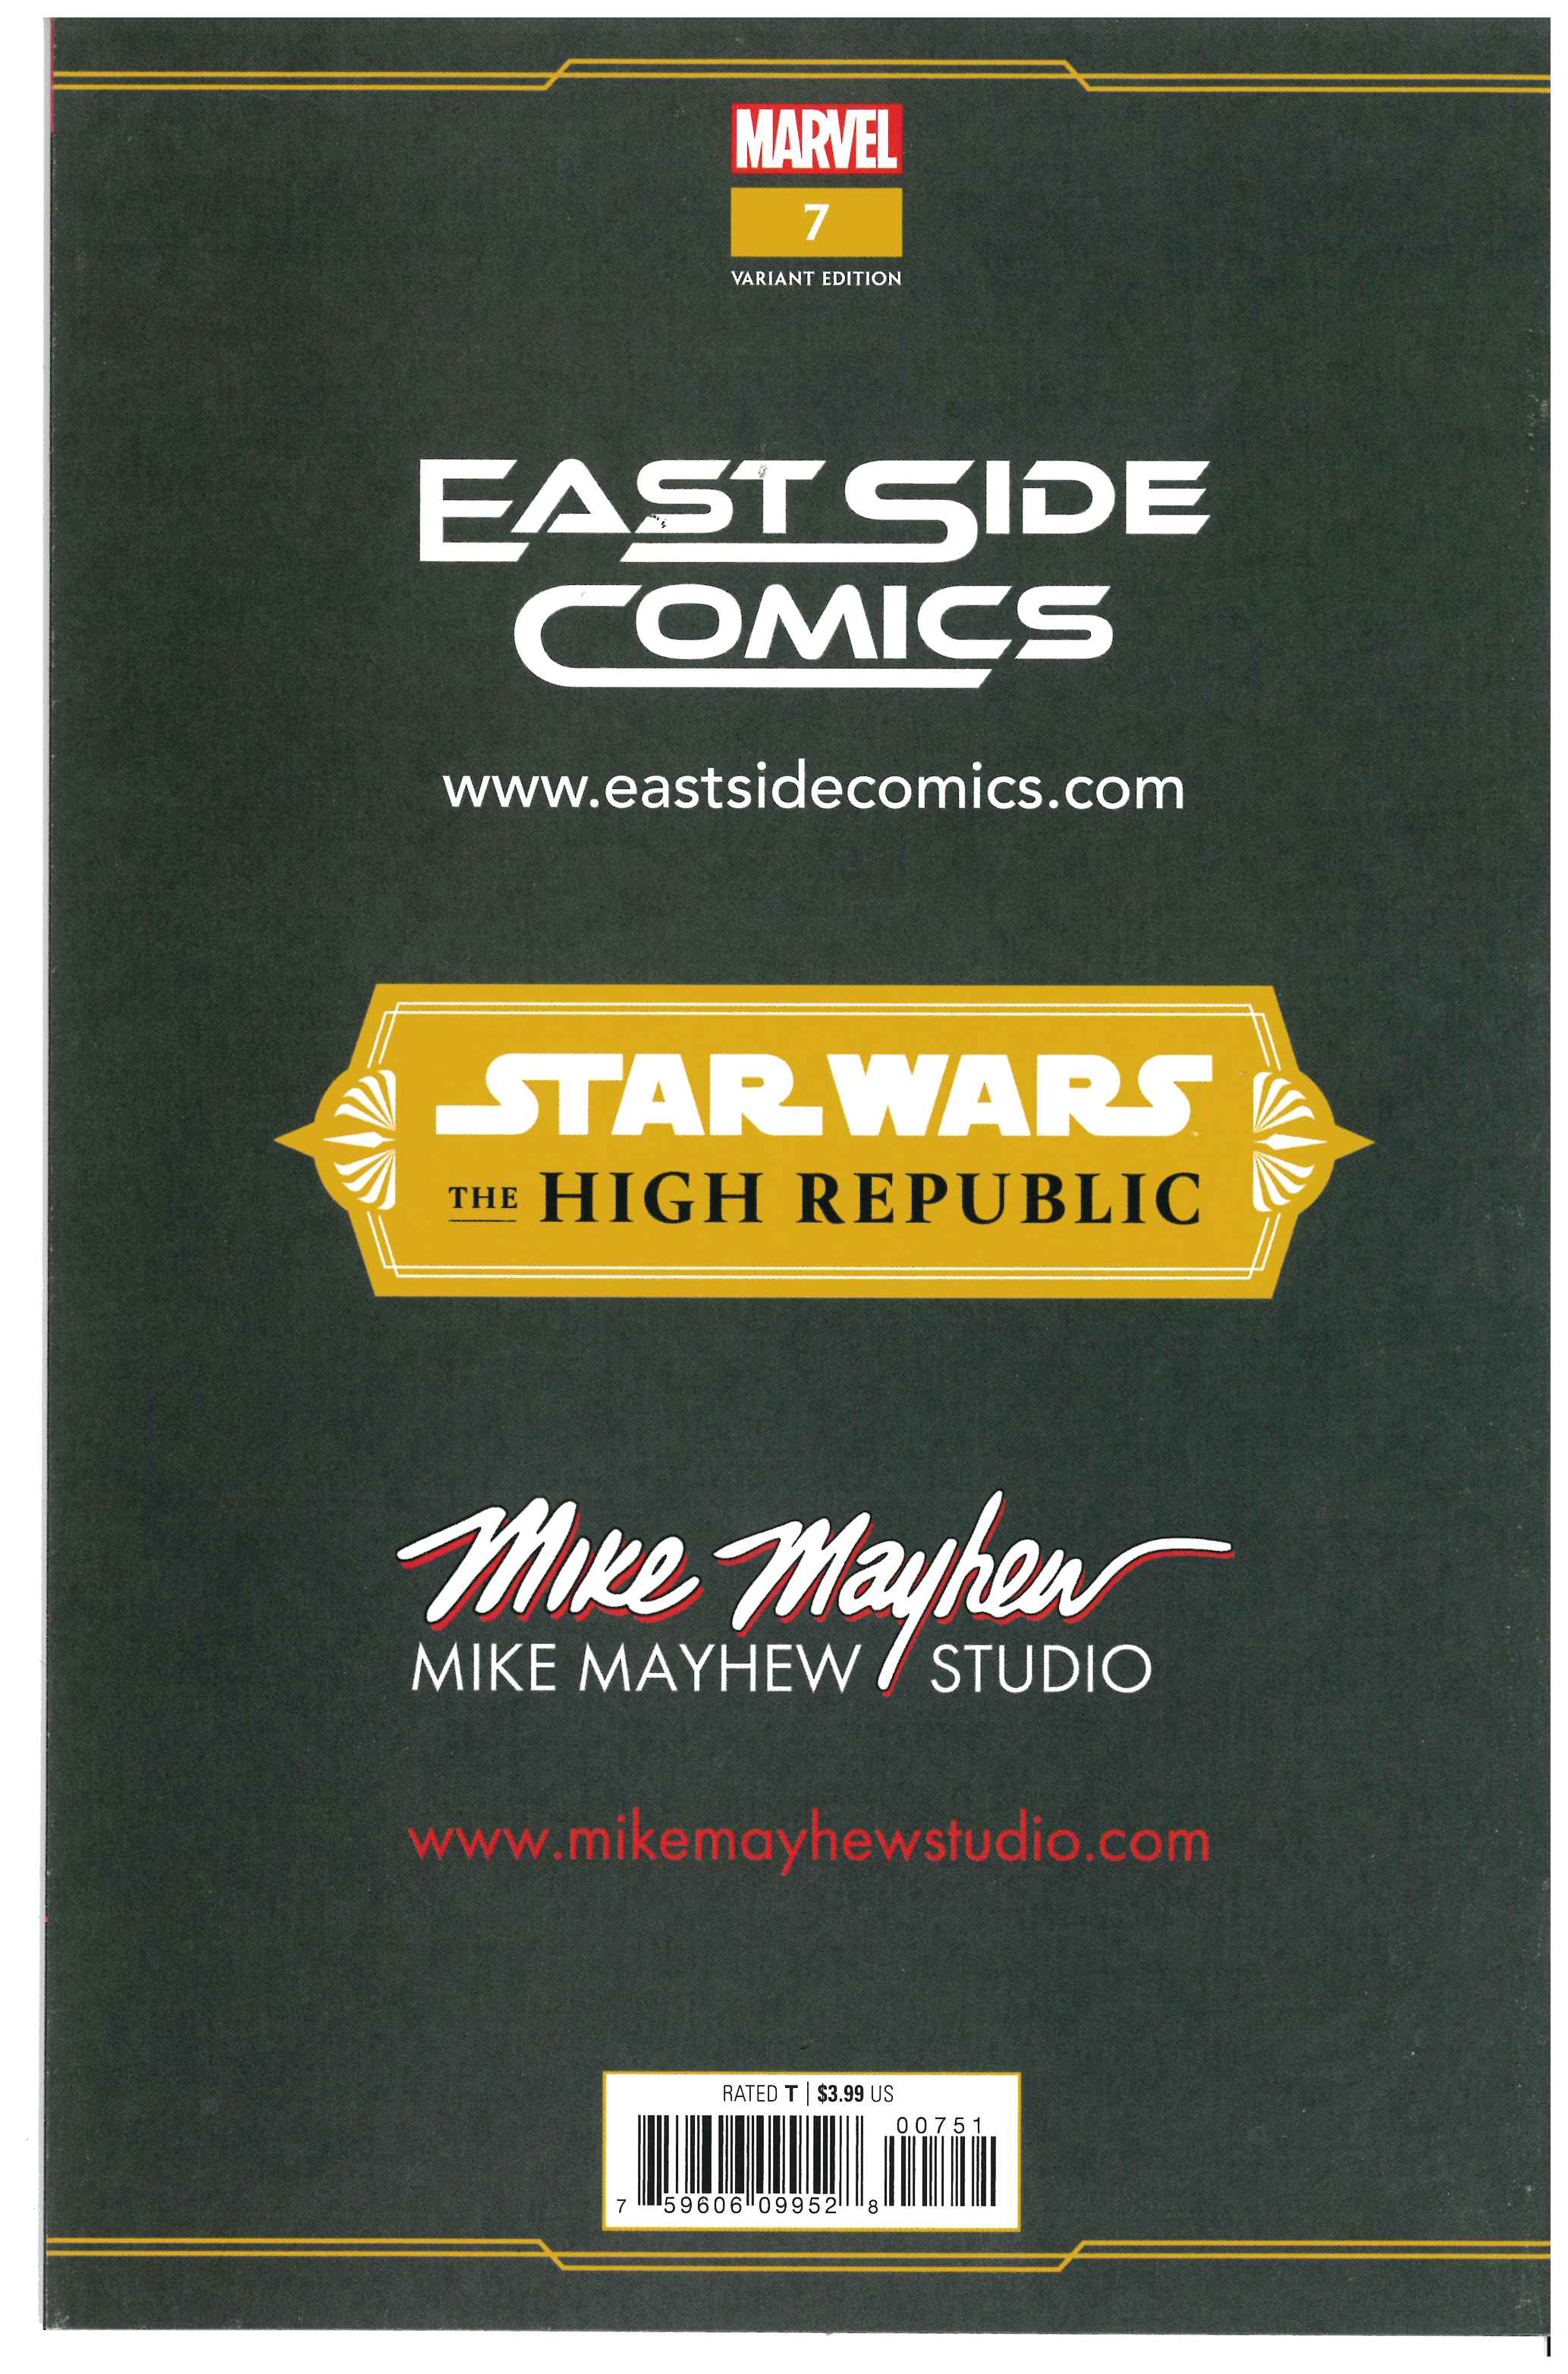 Star Wars: The High Republic #7 | Signed by Mike Mayhew backside